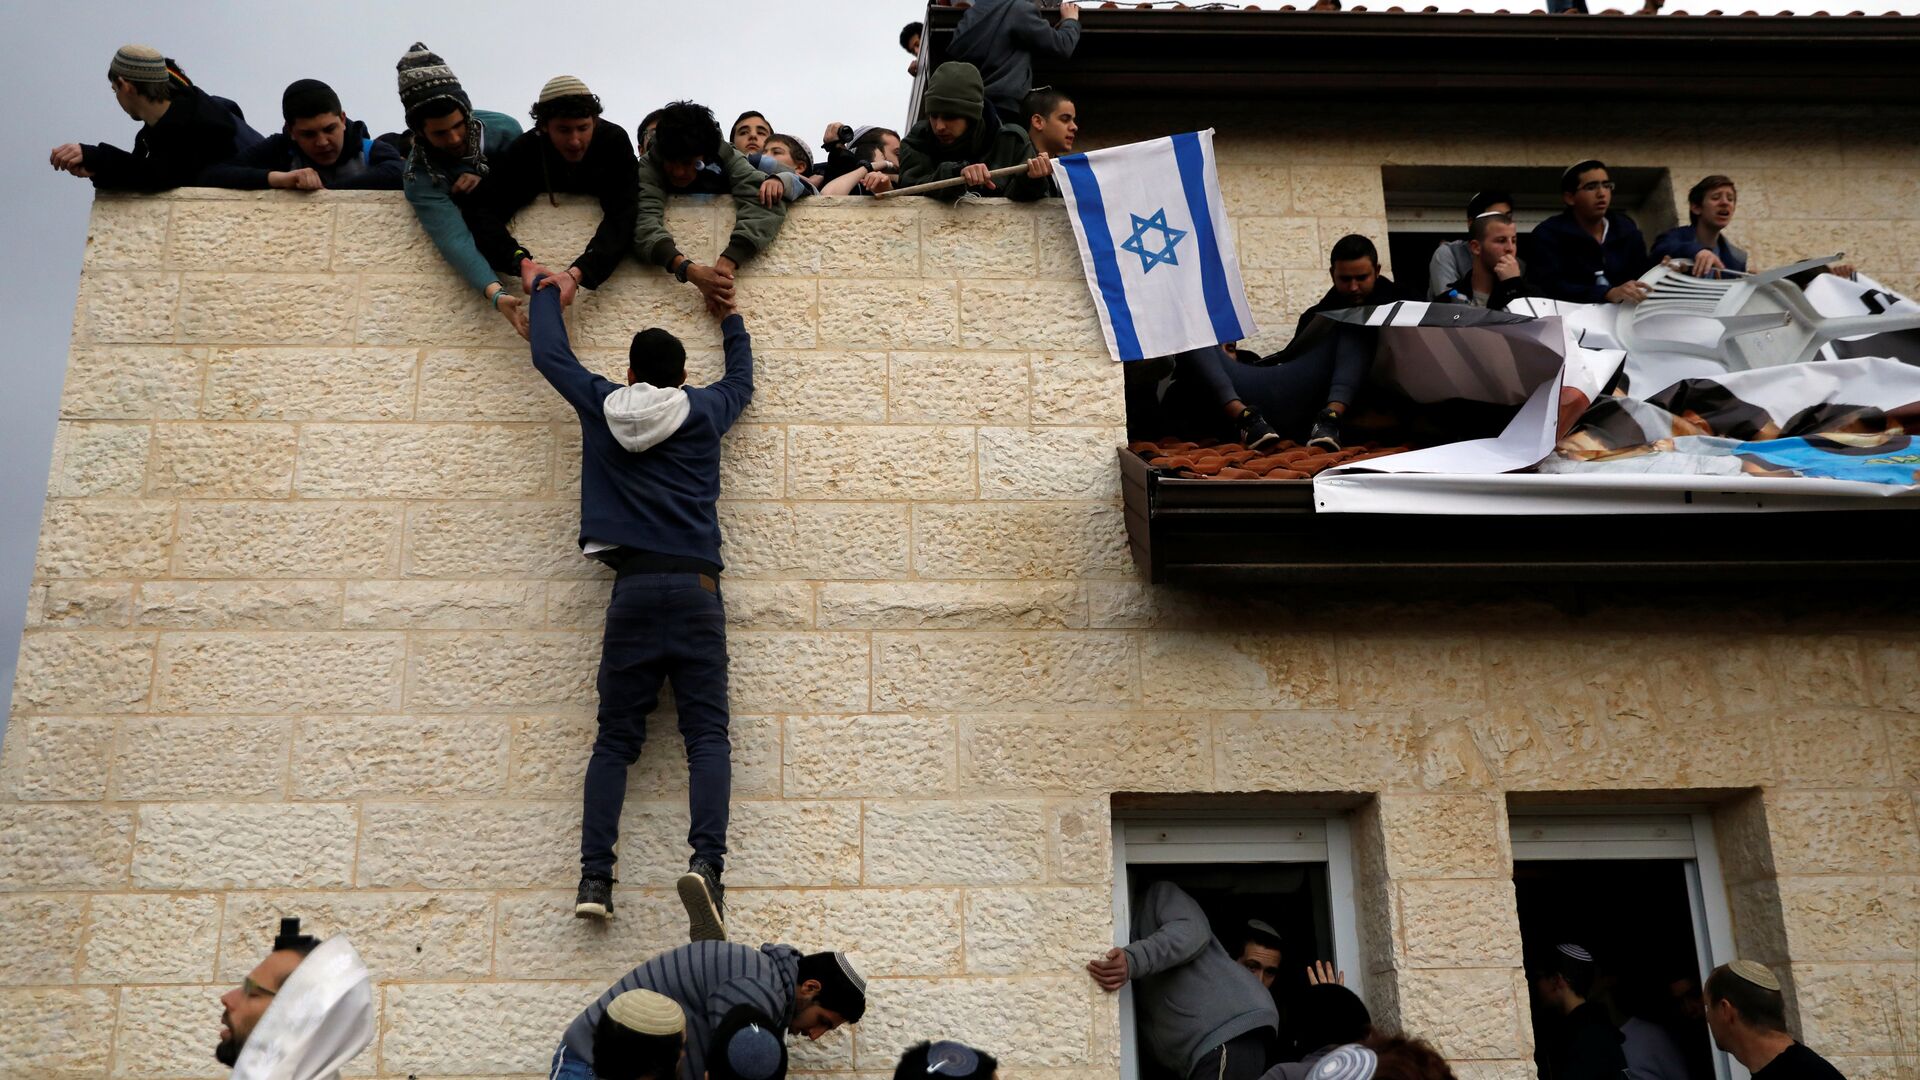 A pro-settlement activist climbs onto a rooftop of a house to resist evacuation of some houses in the settlement of Ofra in the occupied West Bank, during an operation by Israeli forces to evict the houses, February 28, 2017. - Sputnik International, 1920, 09.02.2022